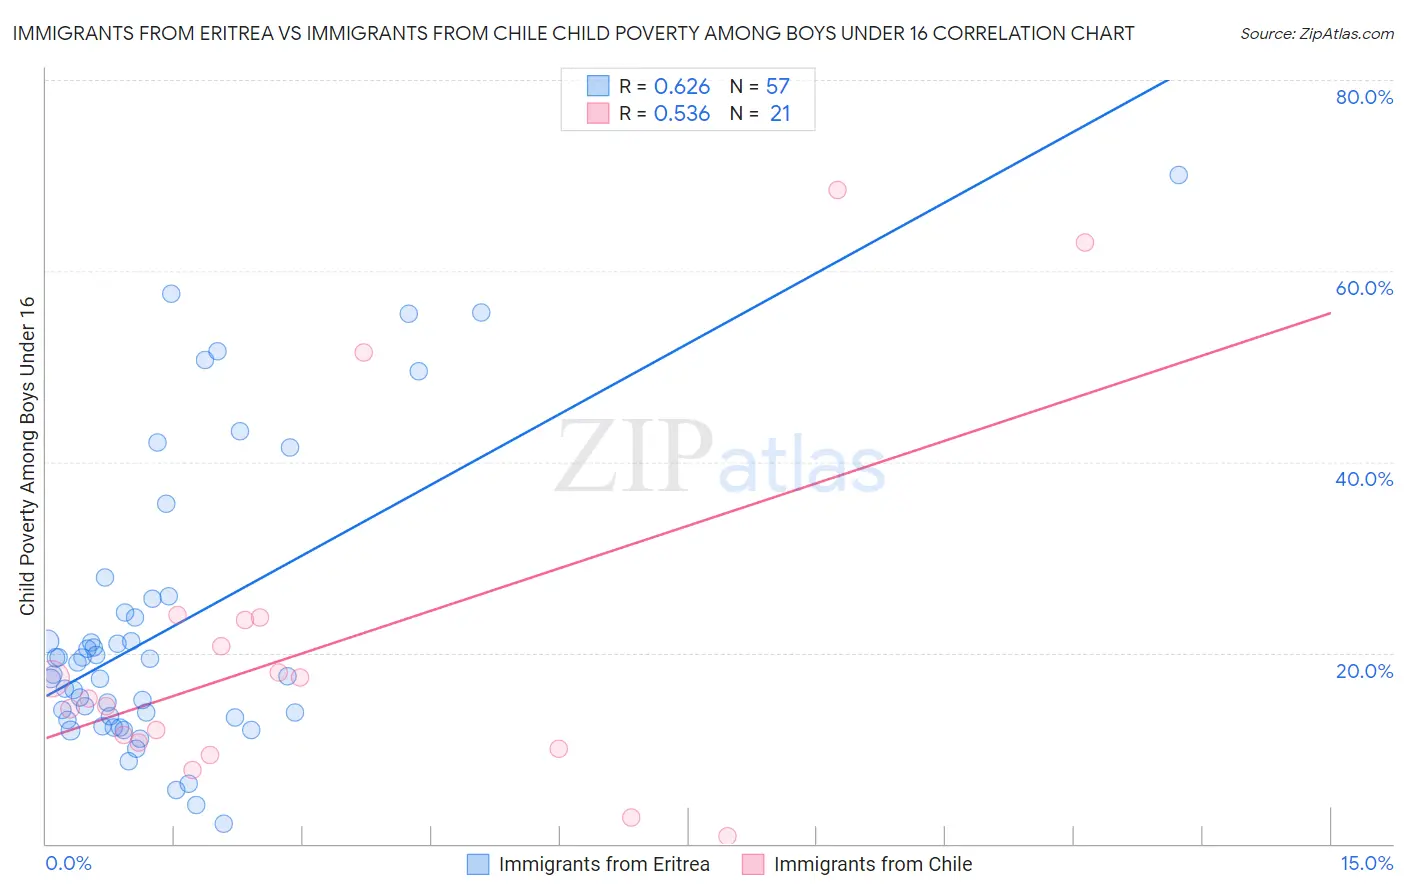 Immigrants from Eritrea vs Immigrants from Chile Child Poverty Among Boys Under 16